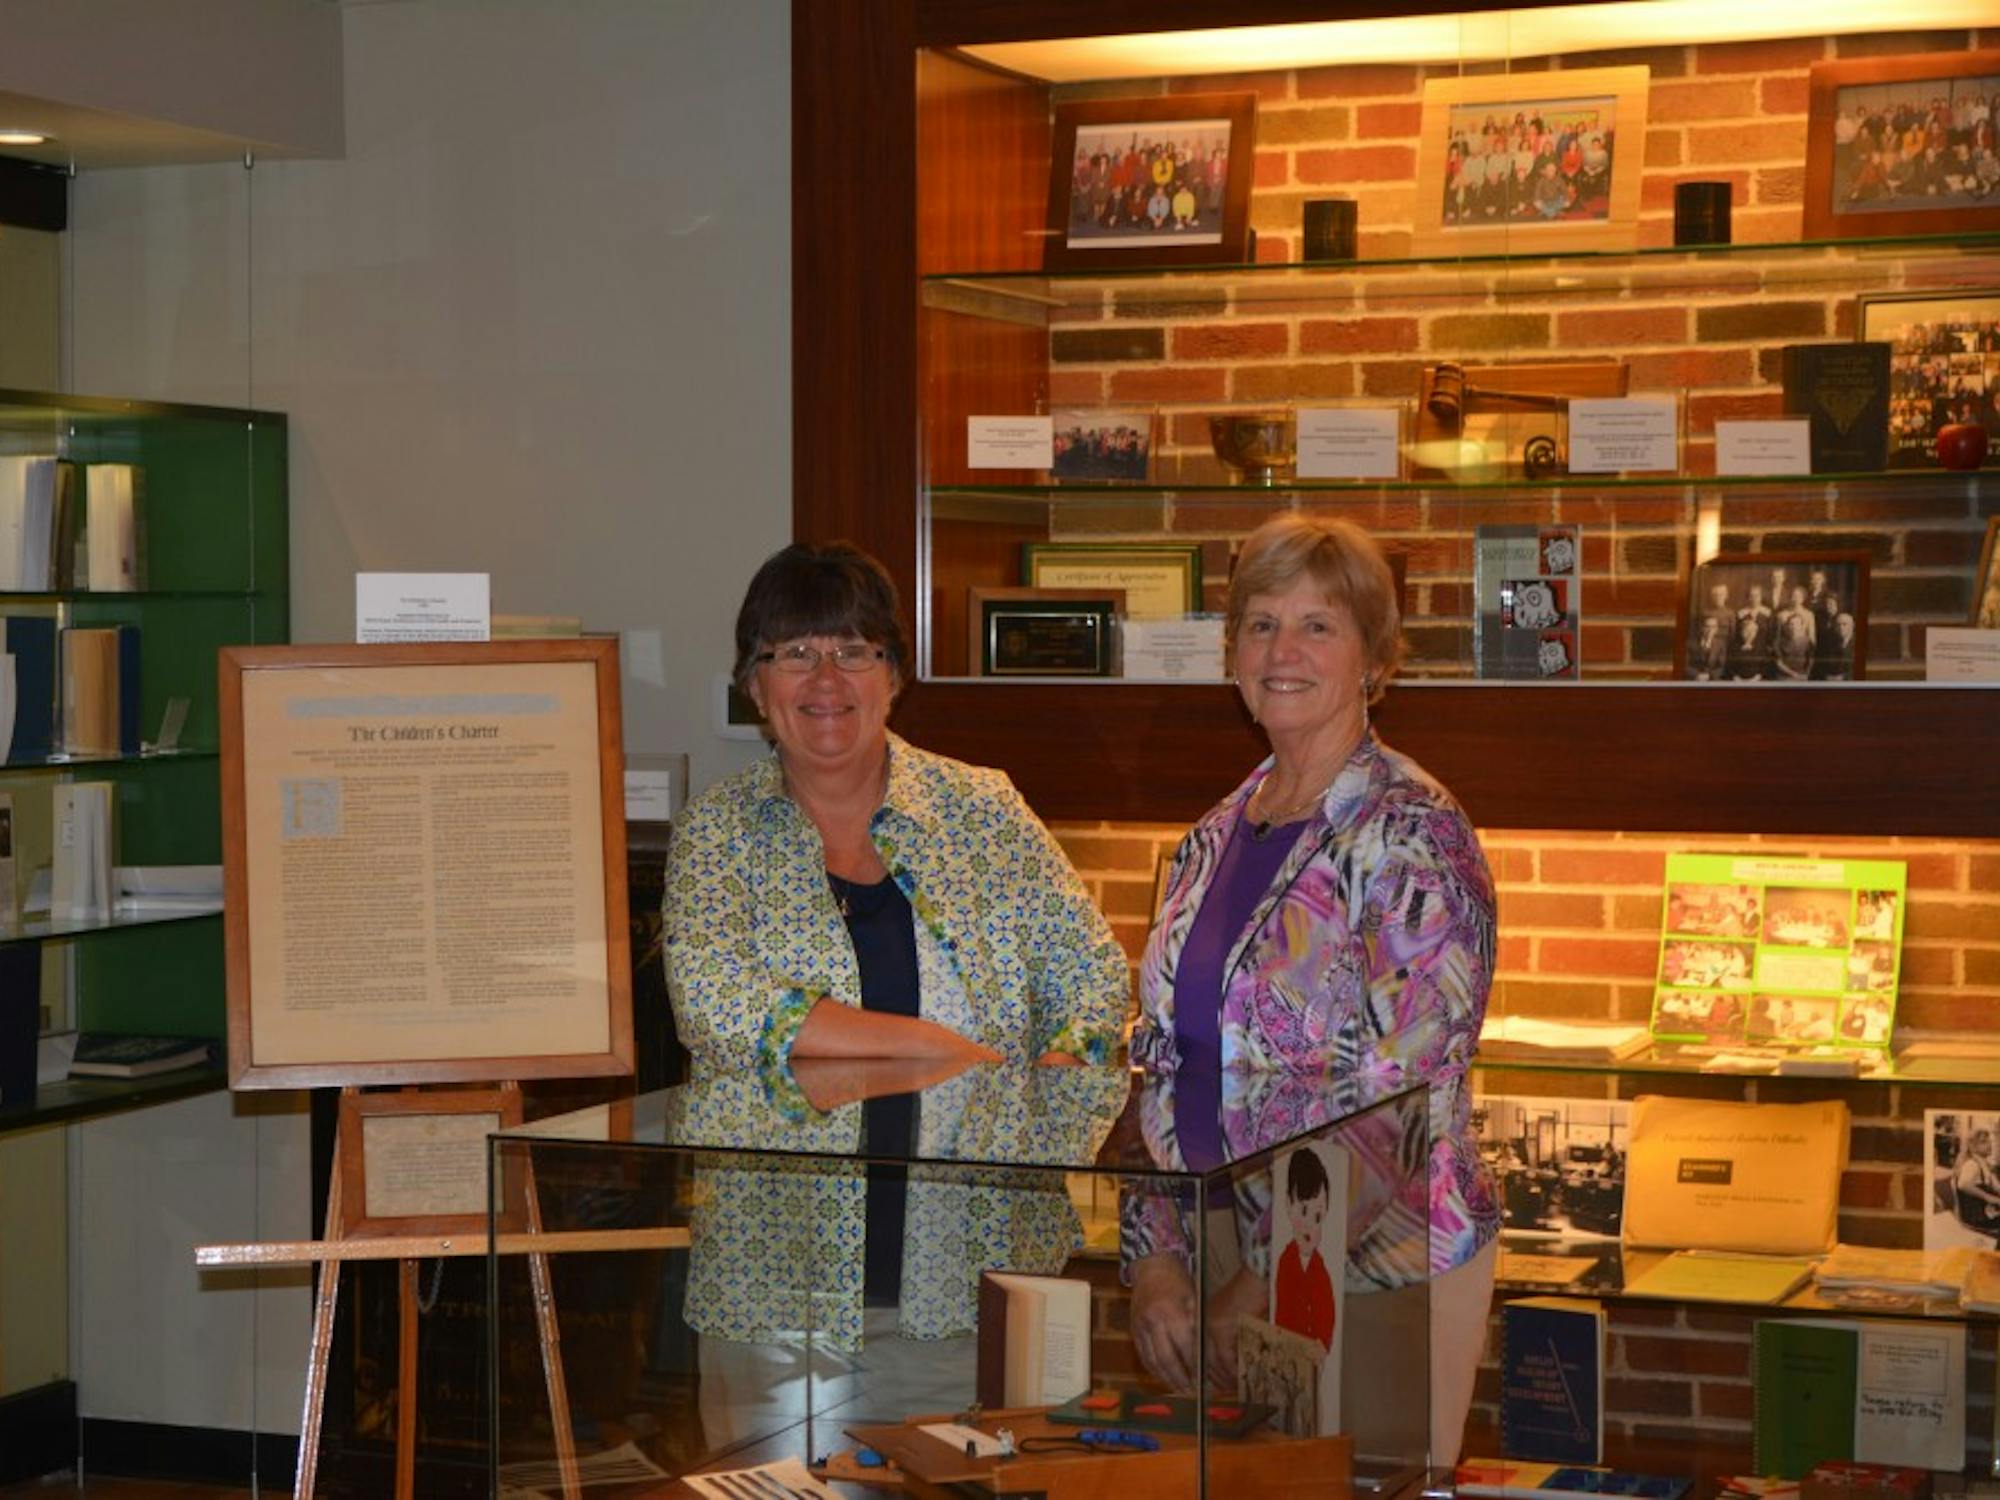 	Lynne Rocklage (left) and Nancy Halmhuber Navarre (right) standing in front of the School of Education display in the McKenny Hall Art Gallery.